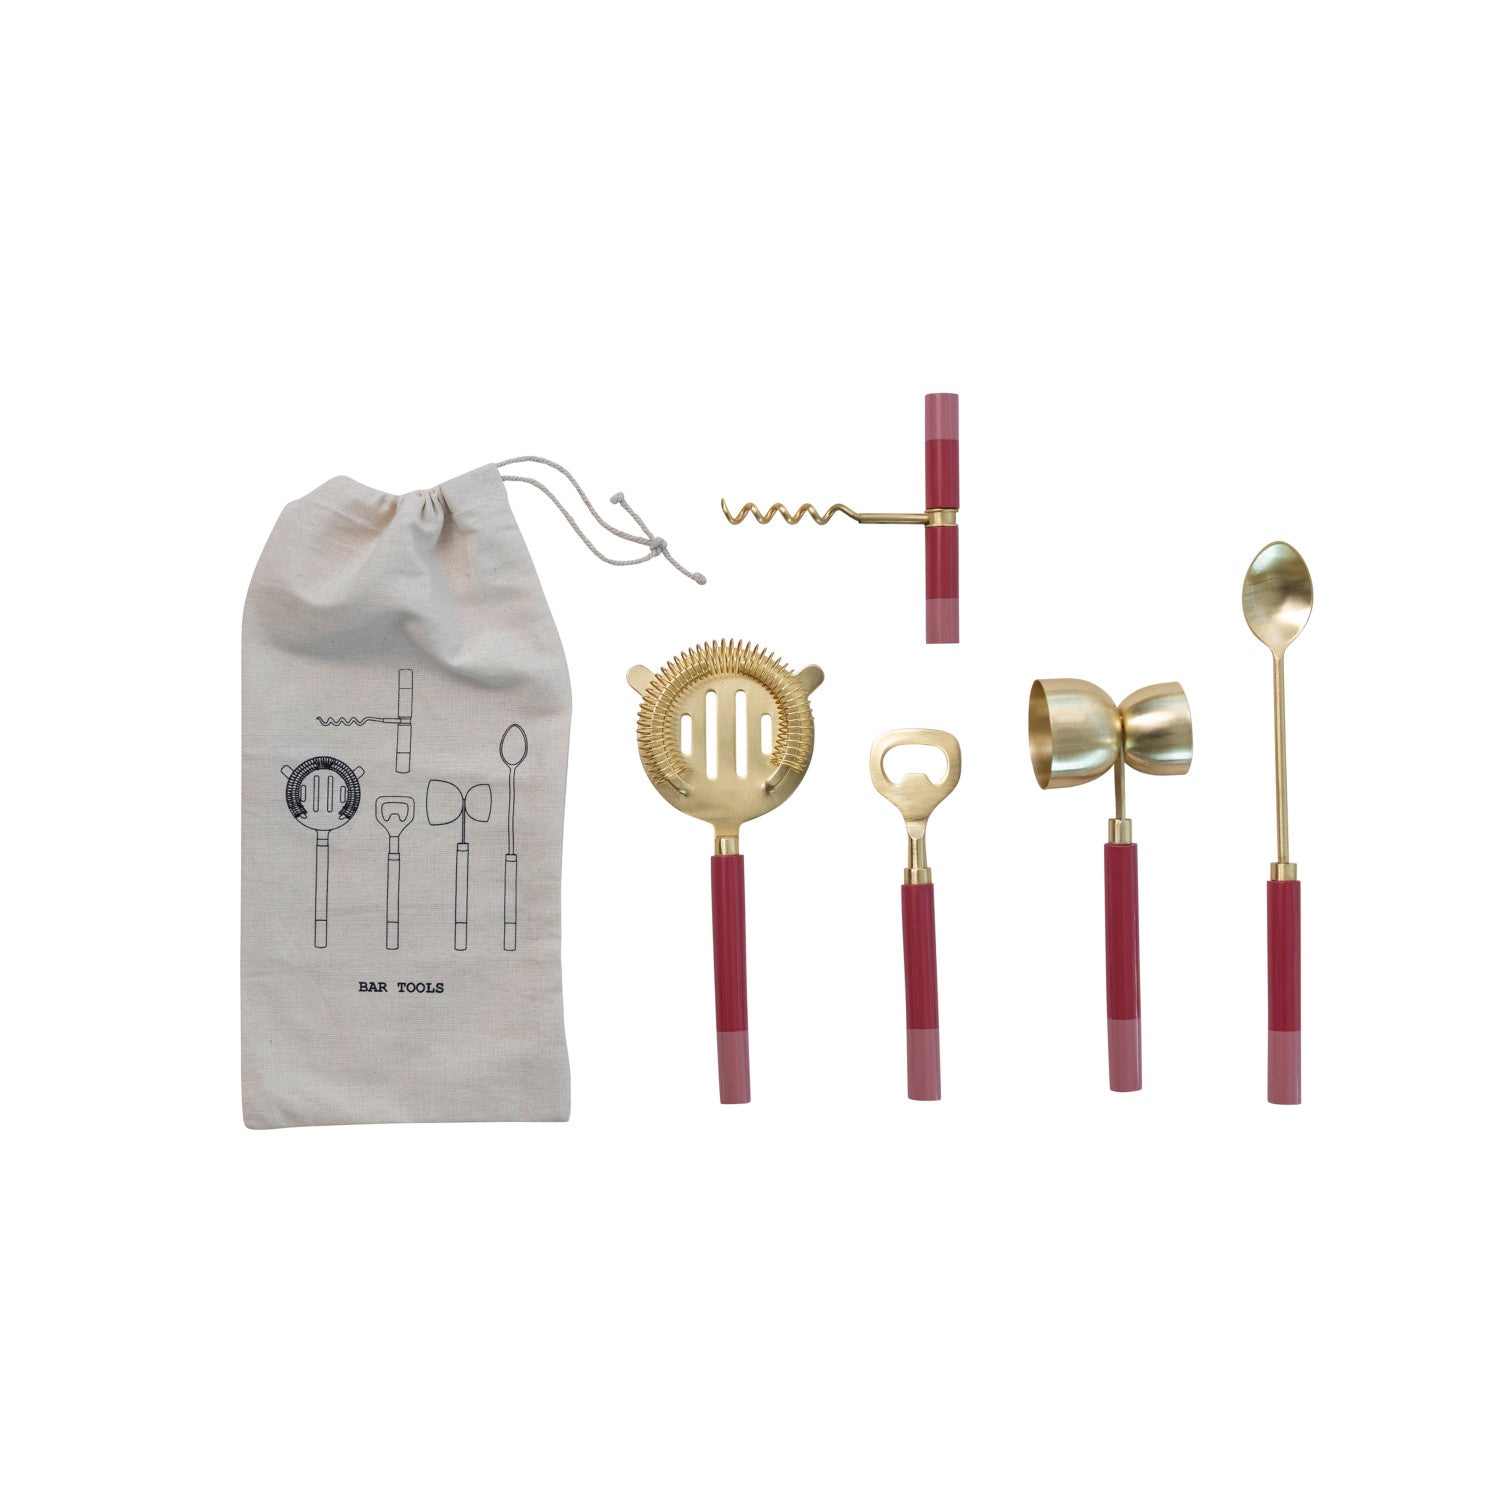 Stainless Steel Bar Tools w/ Resin Handles, Brass Finish and Pink, Set of 5 in Drawstring Bag